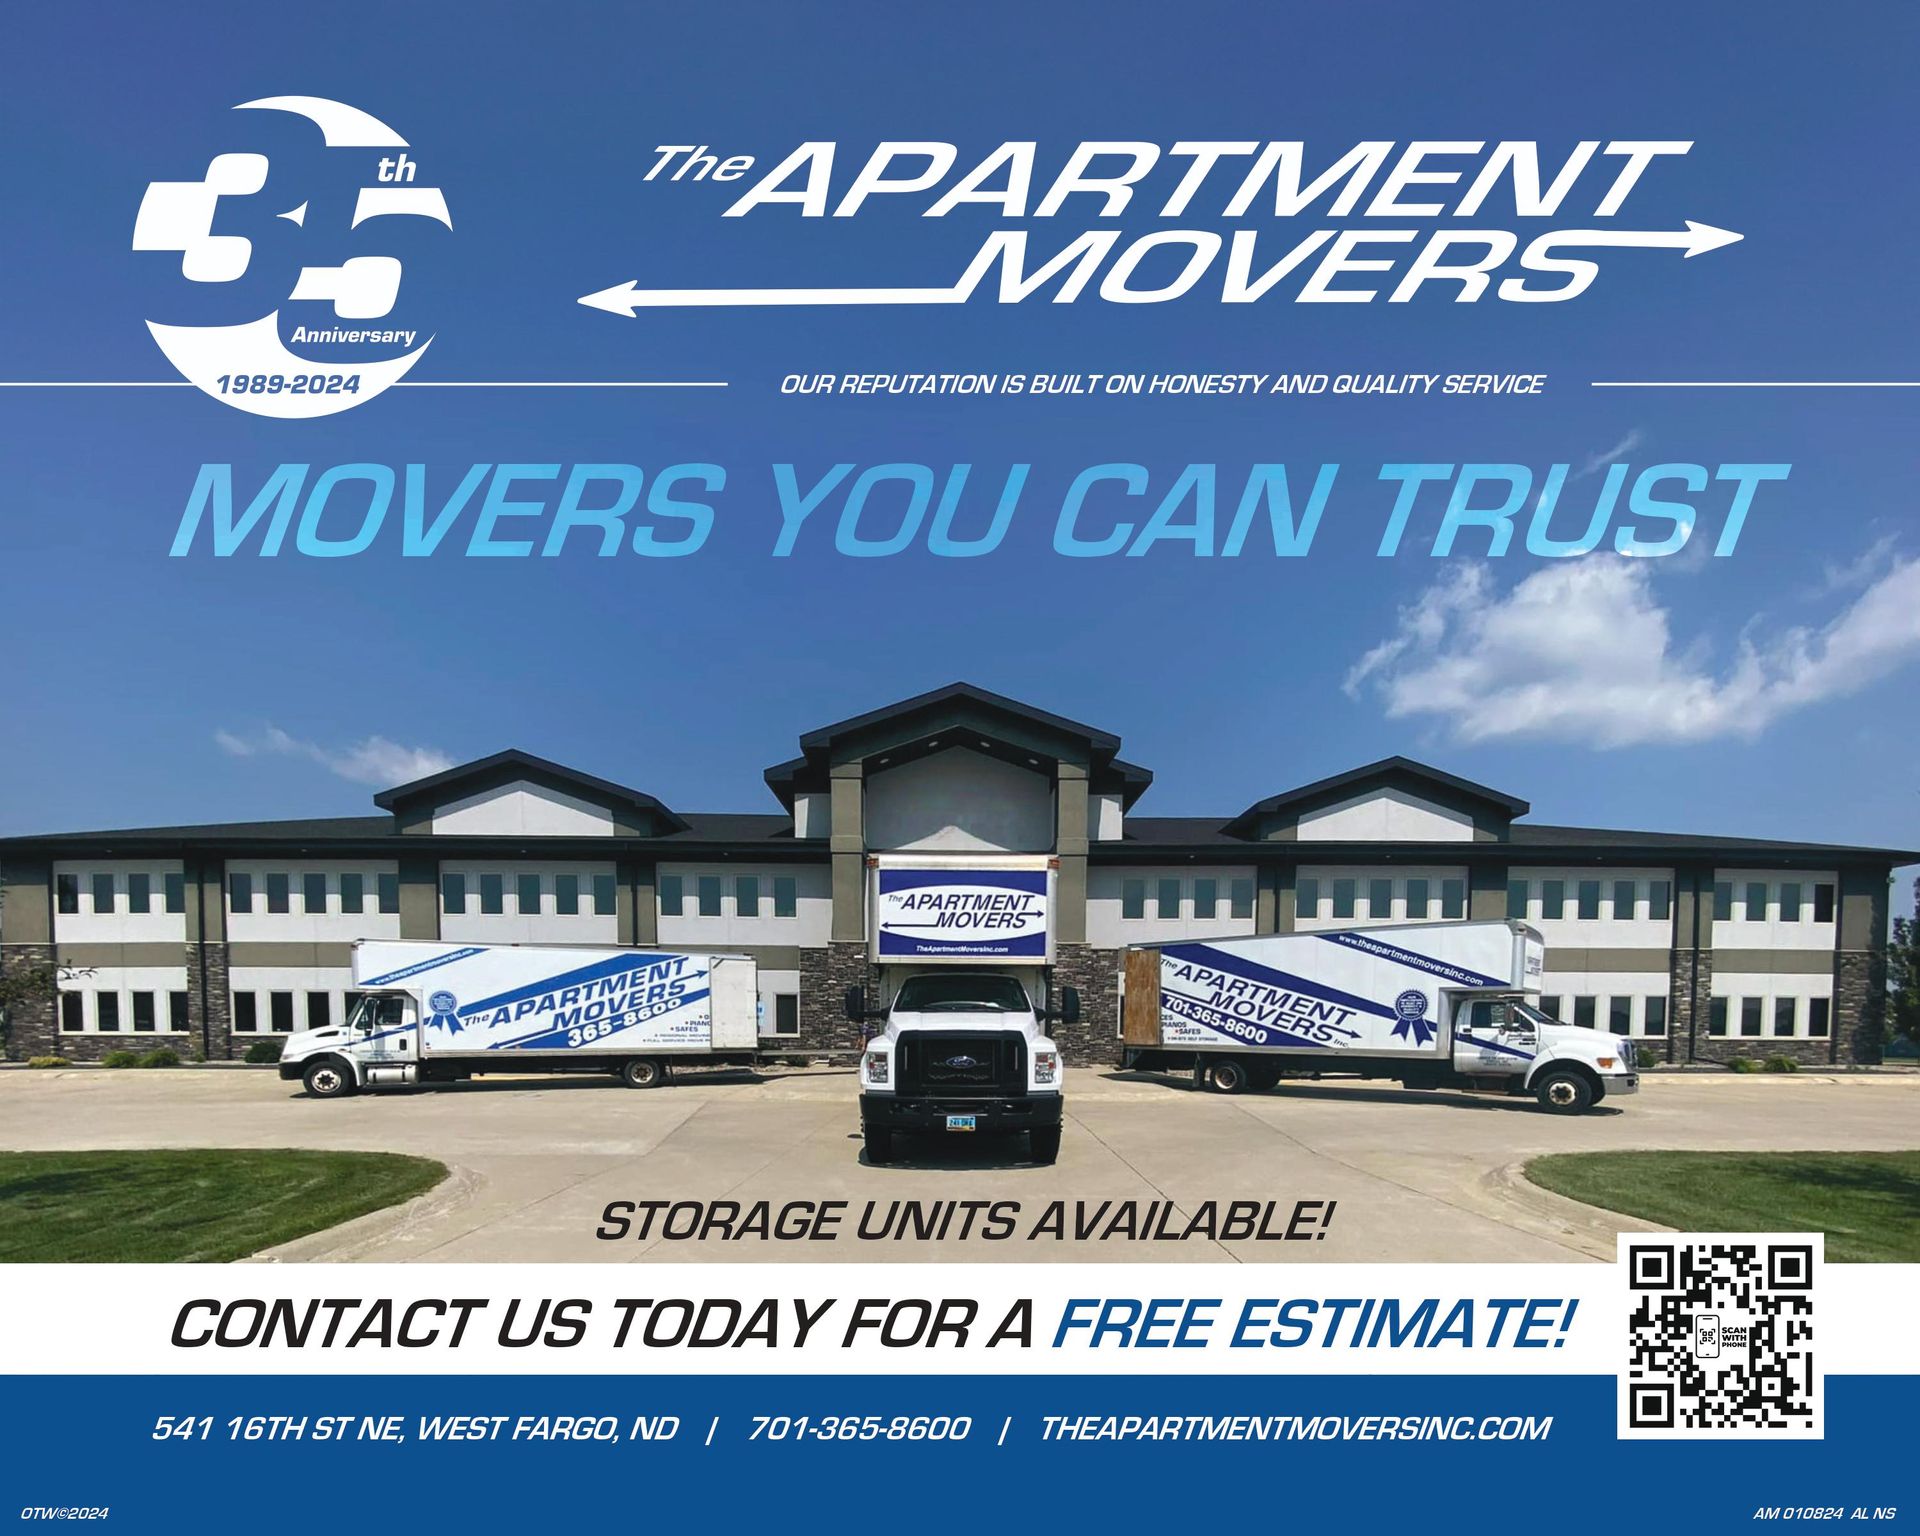 Apartment Movers Flyer